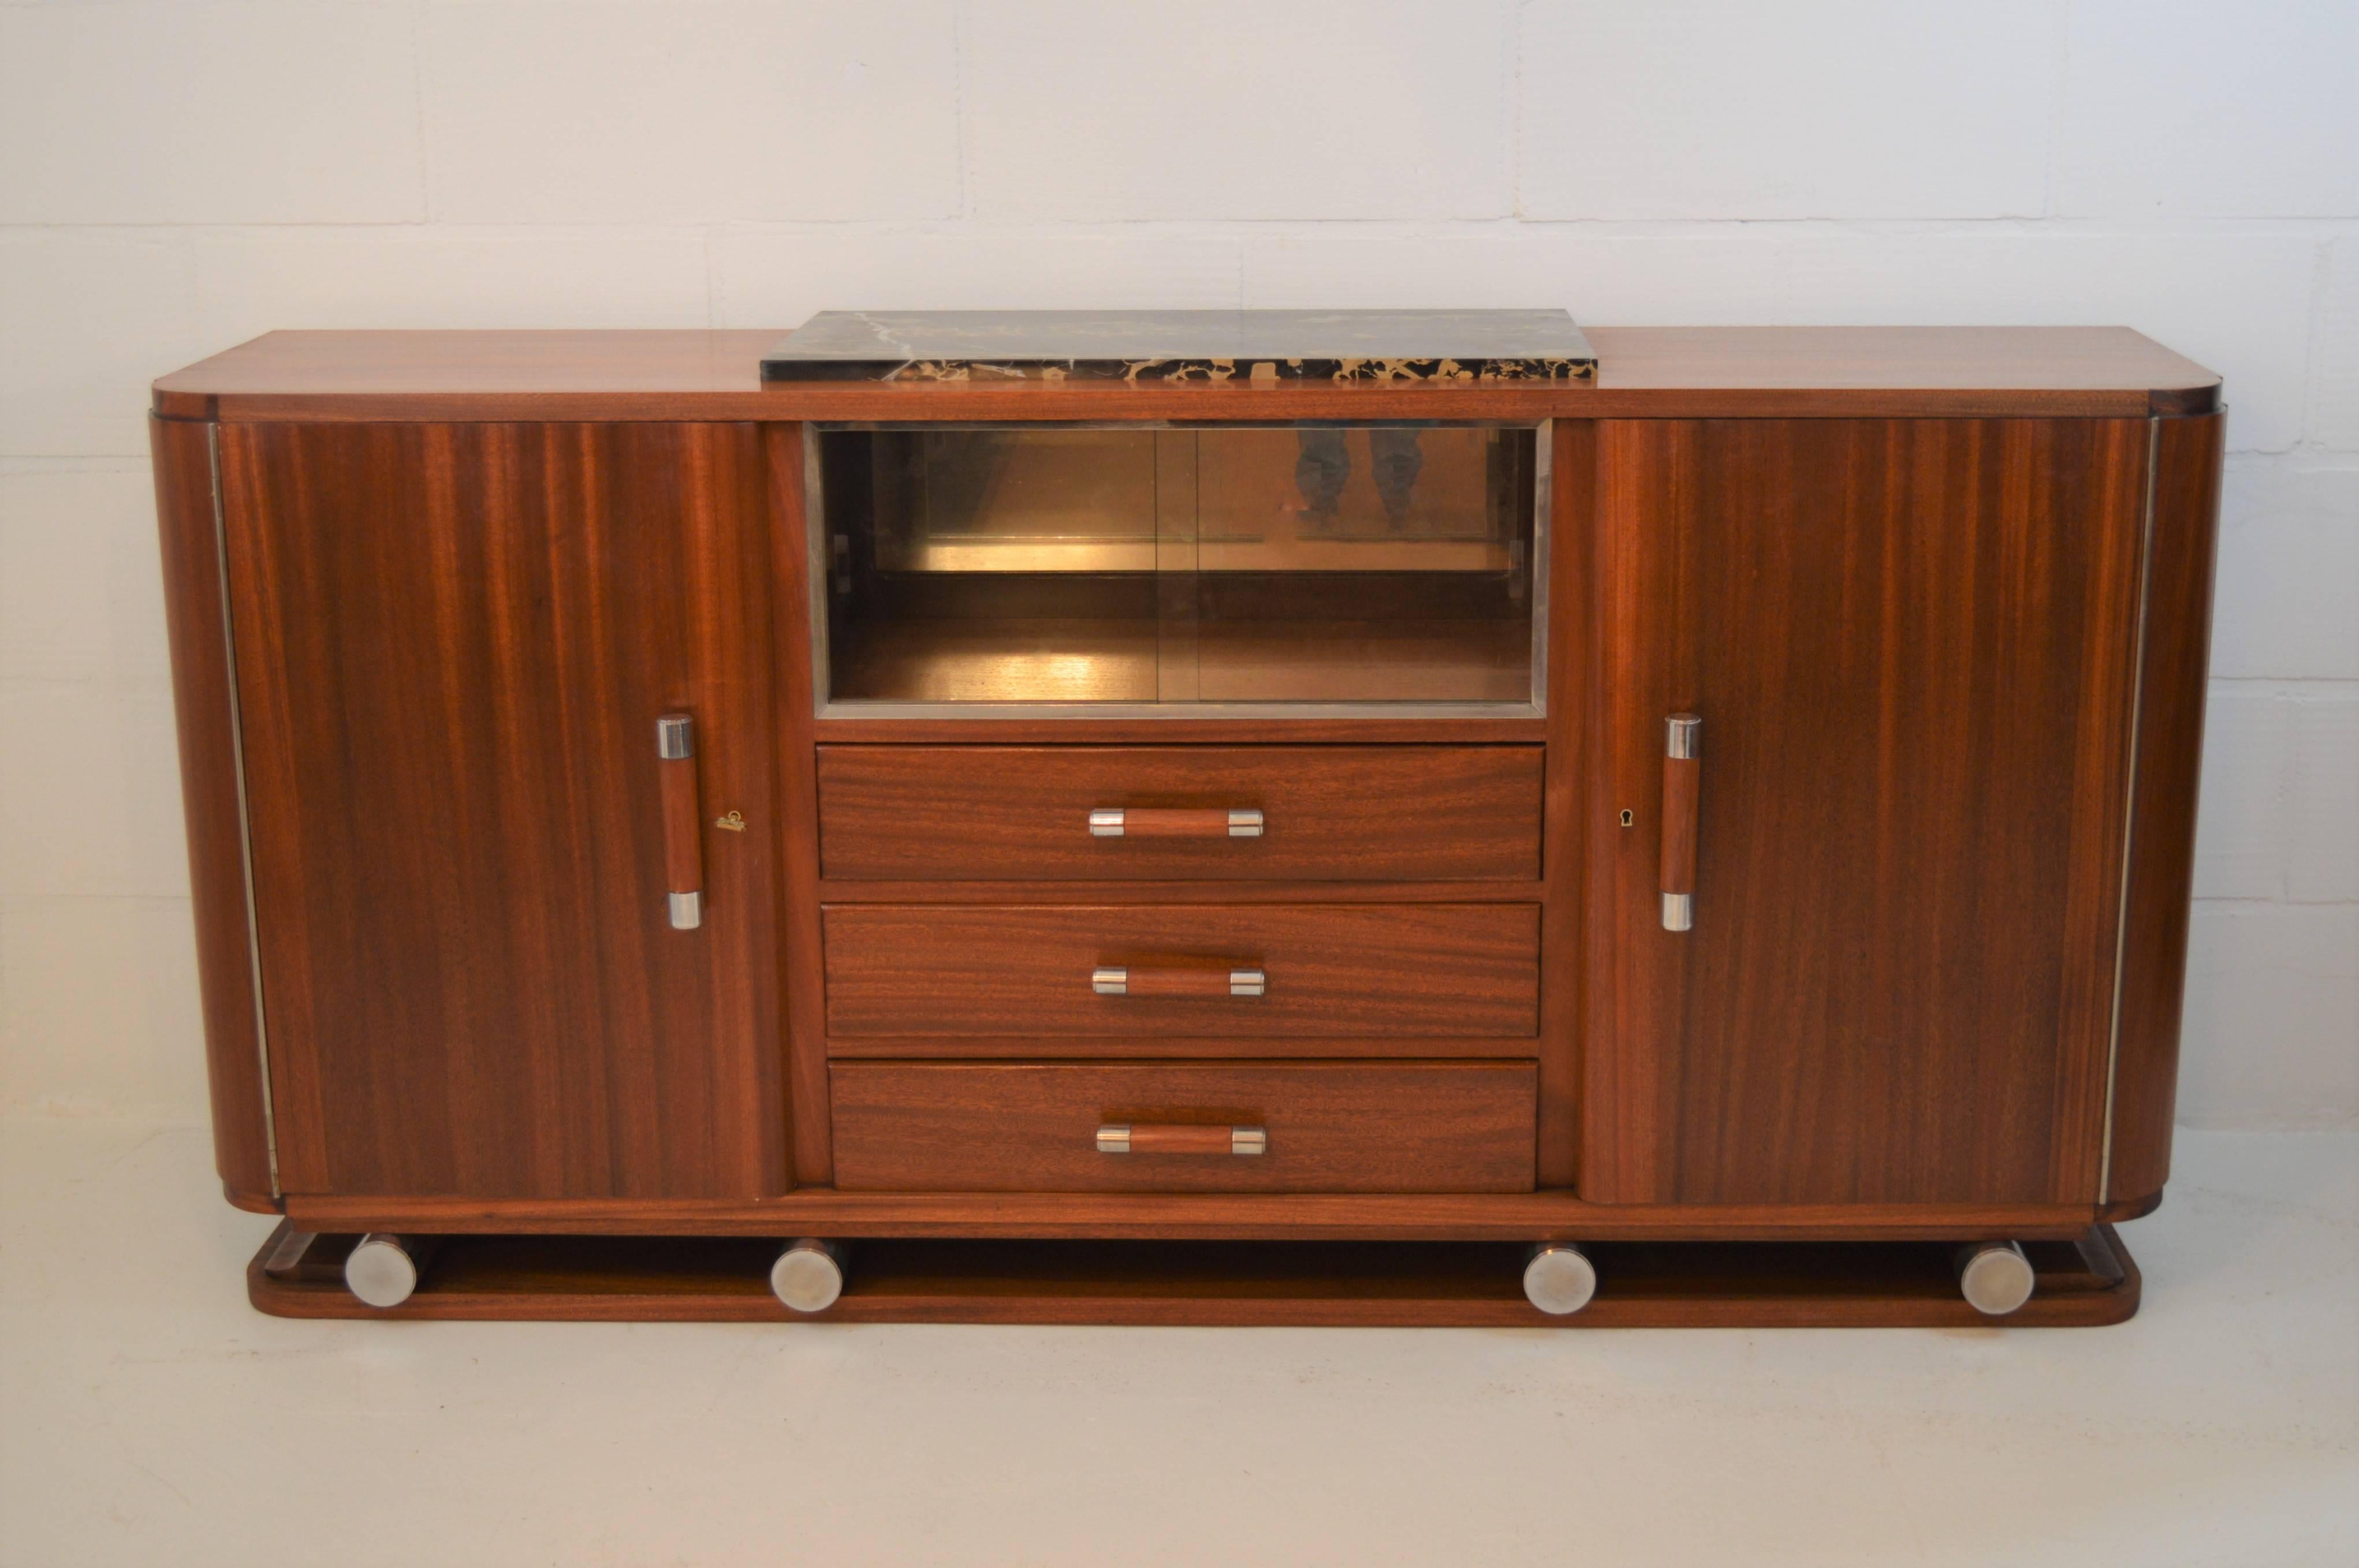 French Fabulous Gaston Poisson Art Deco Sideboard in Solid Mahogany, 1930s